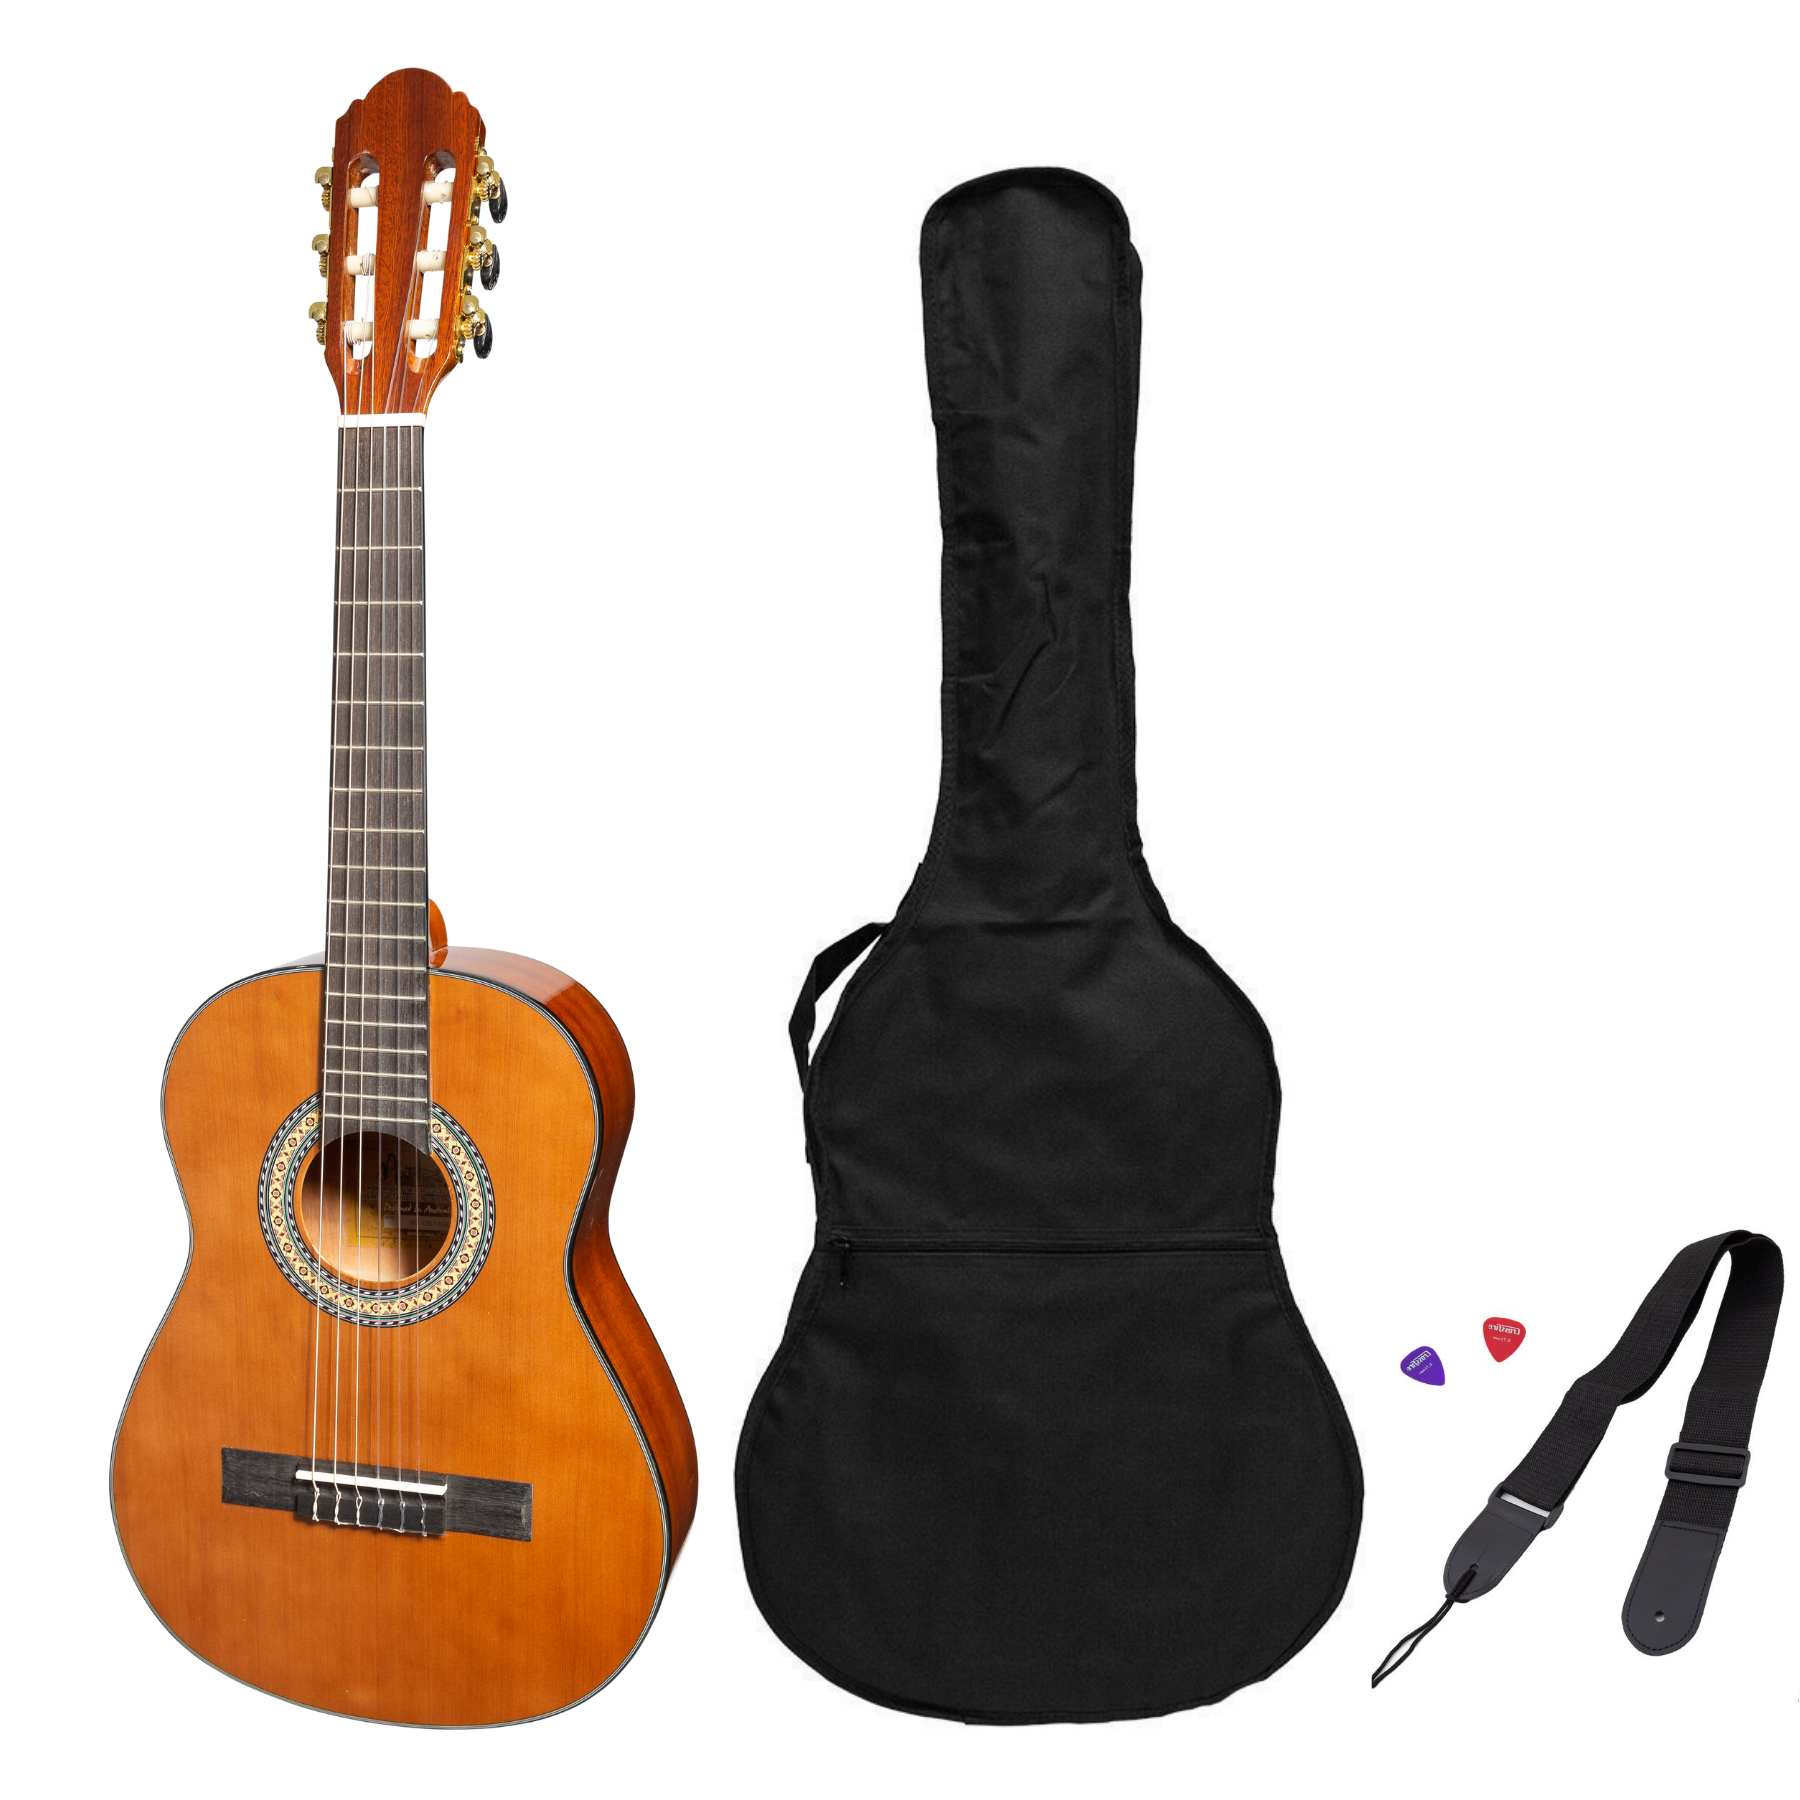 Martinez G-Series 1/2 Size Student Classical Guitar Pack with Built In Tuner (Natural-Gloss)-MP-12GT-NGL